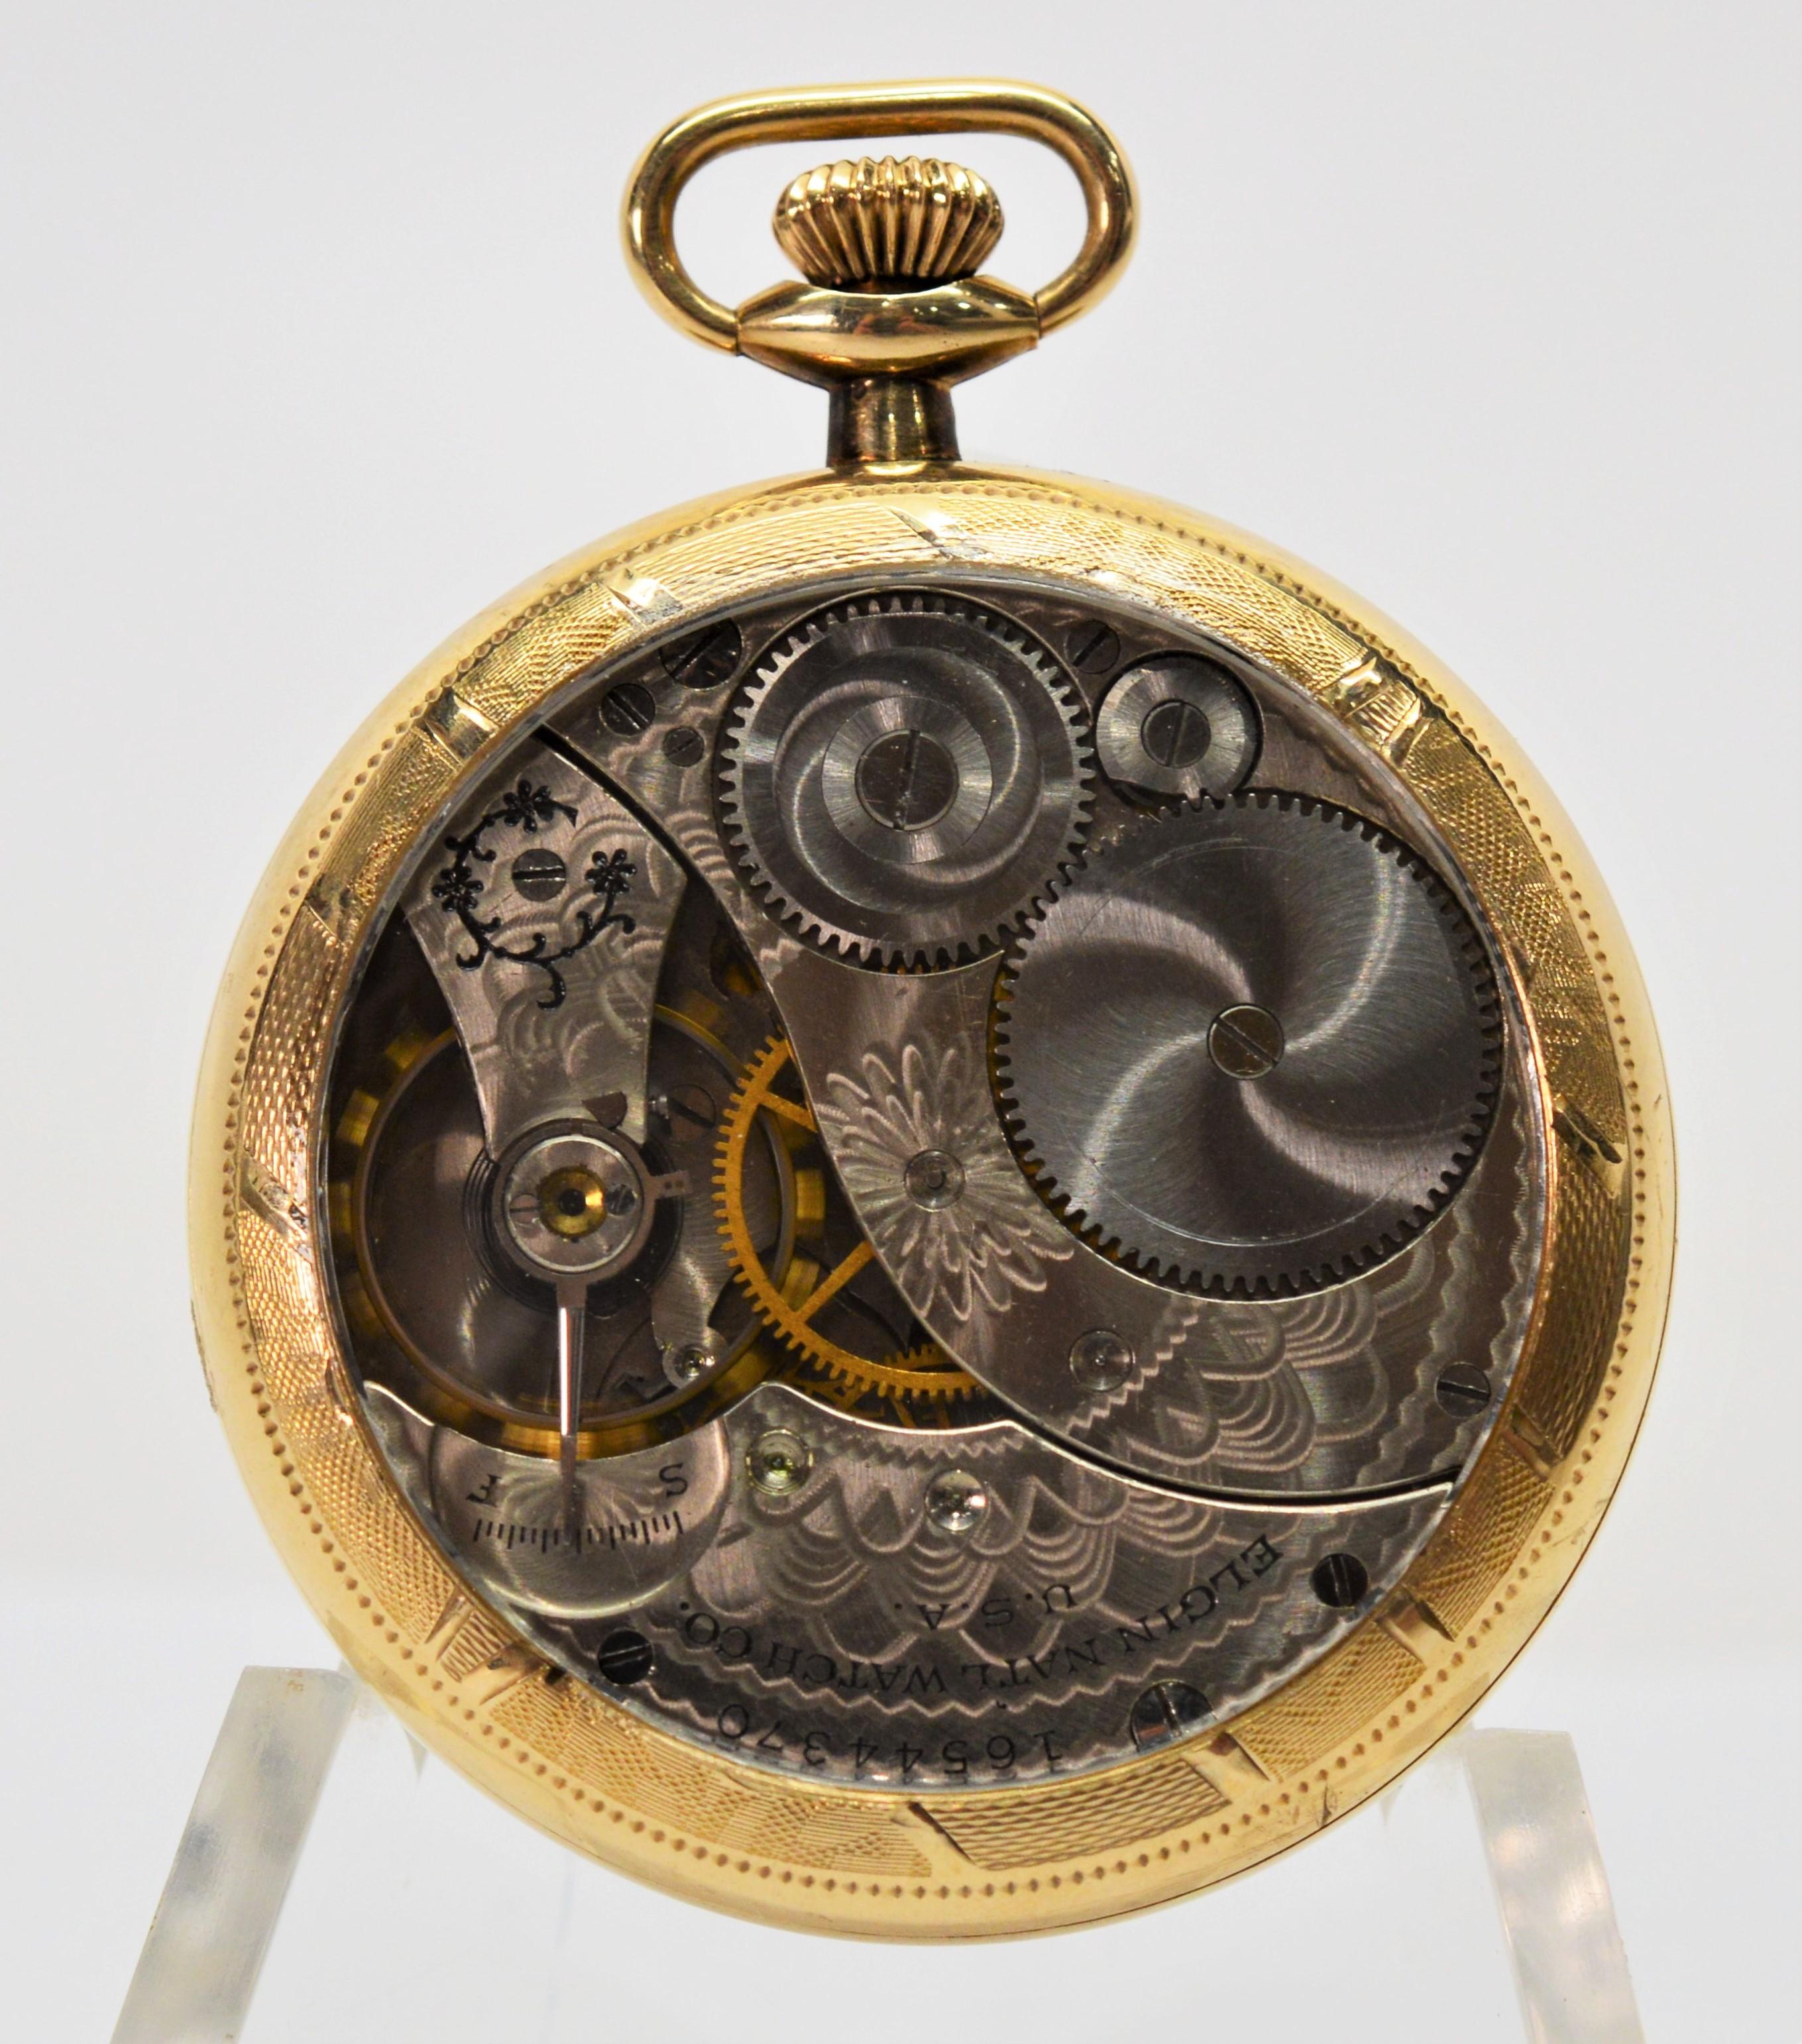 By Elgin National Watch Co., this circa 1912 American made brass pocket watch model #303 has been restored with a display back for a mesmerizing view of its beautiful fancy acid etched seven jewel movement. In watch size 12S ( approximately 1 3/4